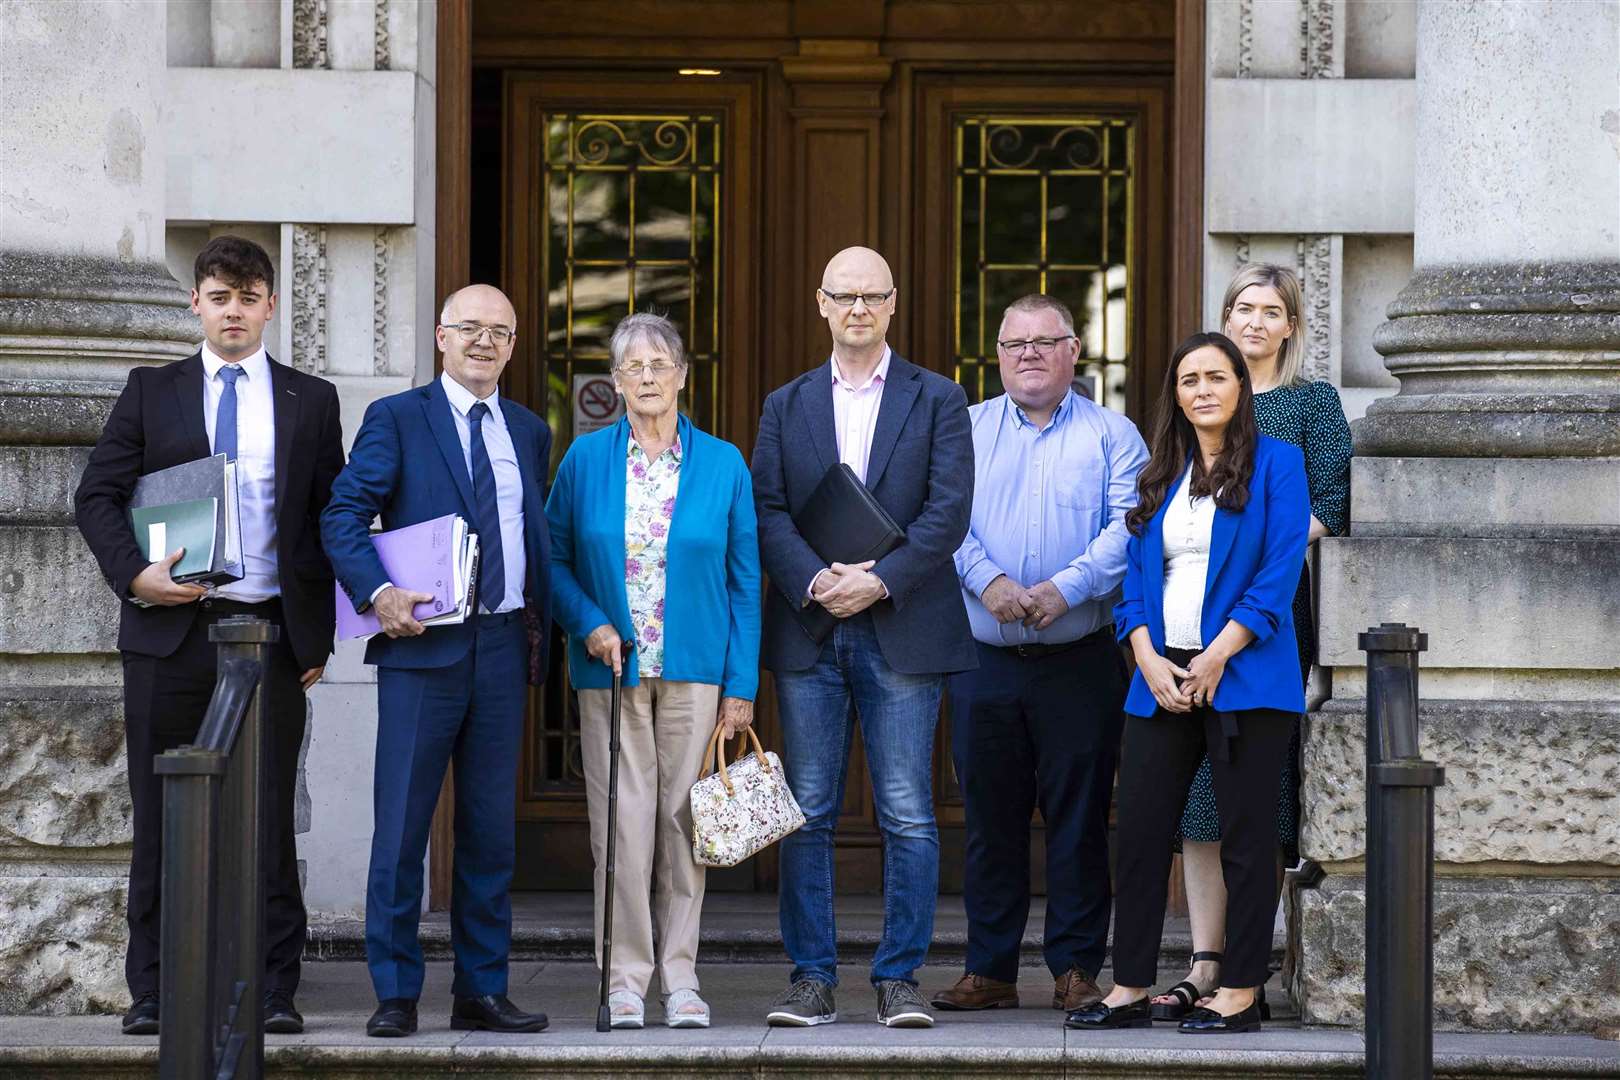 (L to R) Solicitors Darragh O’Kane and Adrian O’Kane, Patsy Kelly’s widow Teresa, son Patsy Kelly Jr, and Sinn Fein representatives Declan McAleer MLA, Orfhlaith Begley MP, and Nicola Brogan MLA at the High Court in Belfast (Liam McBurney/PA)